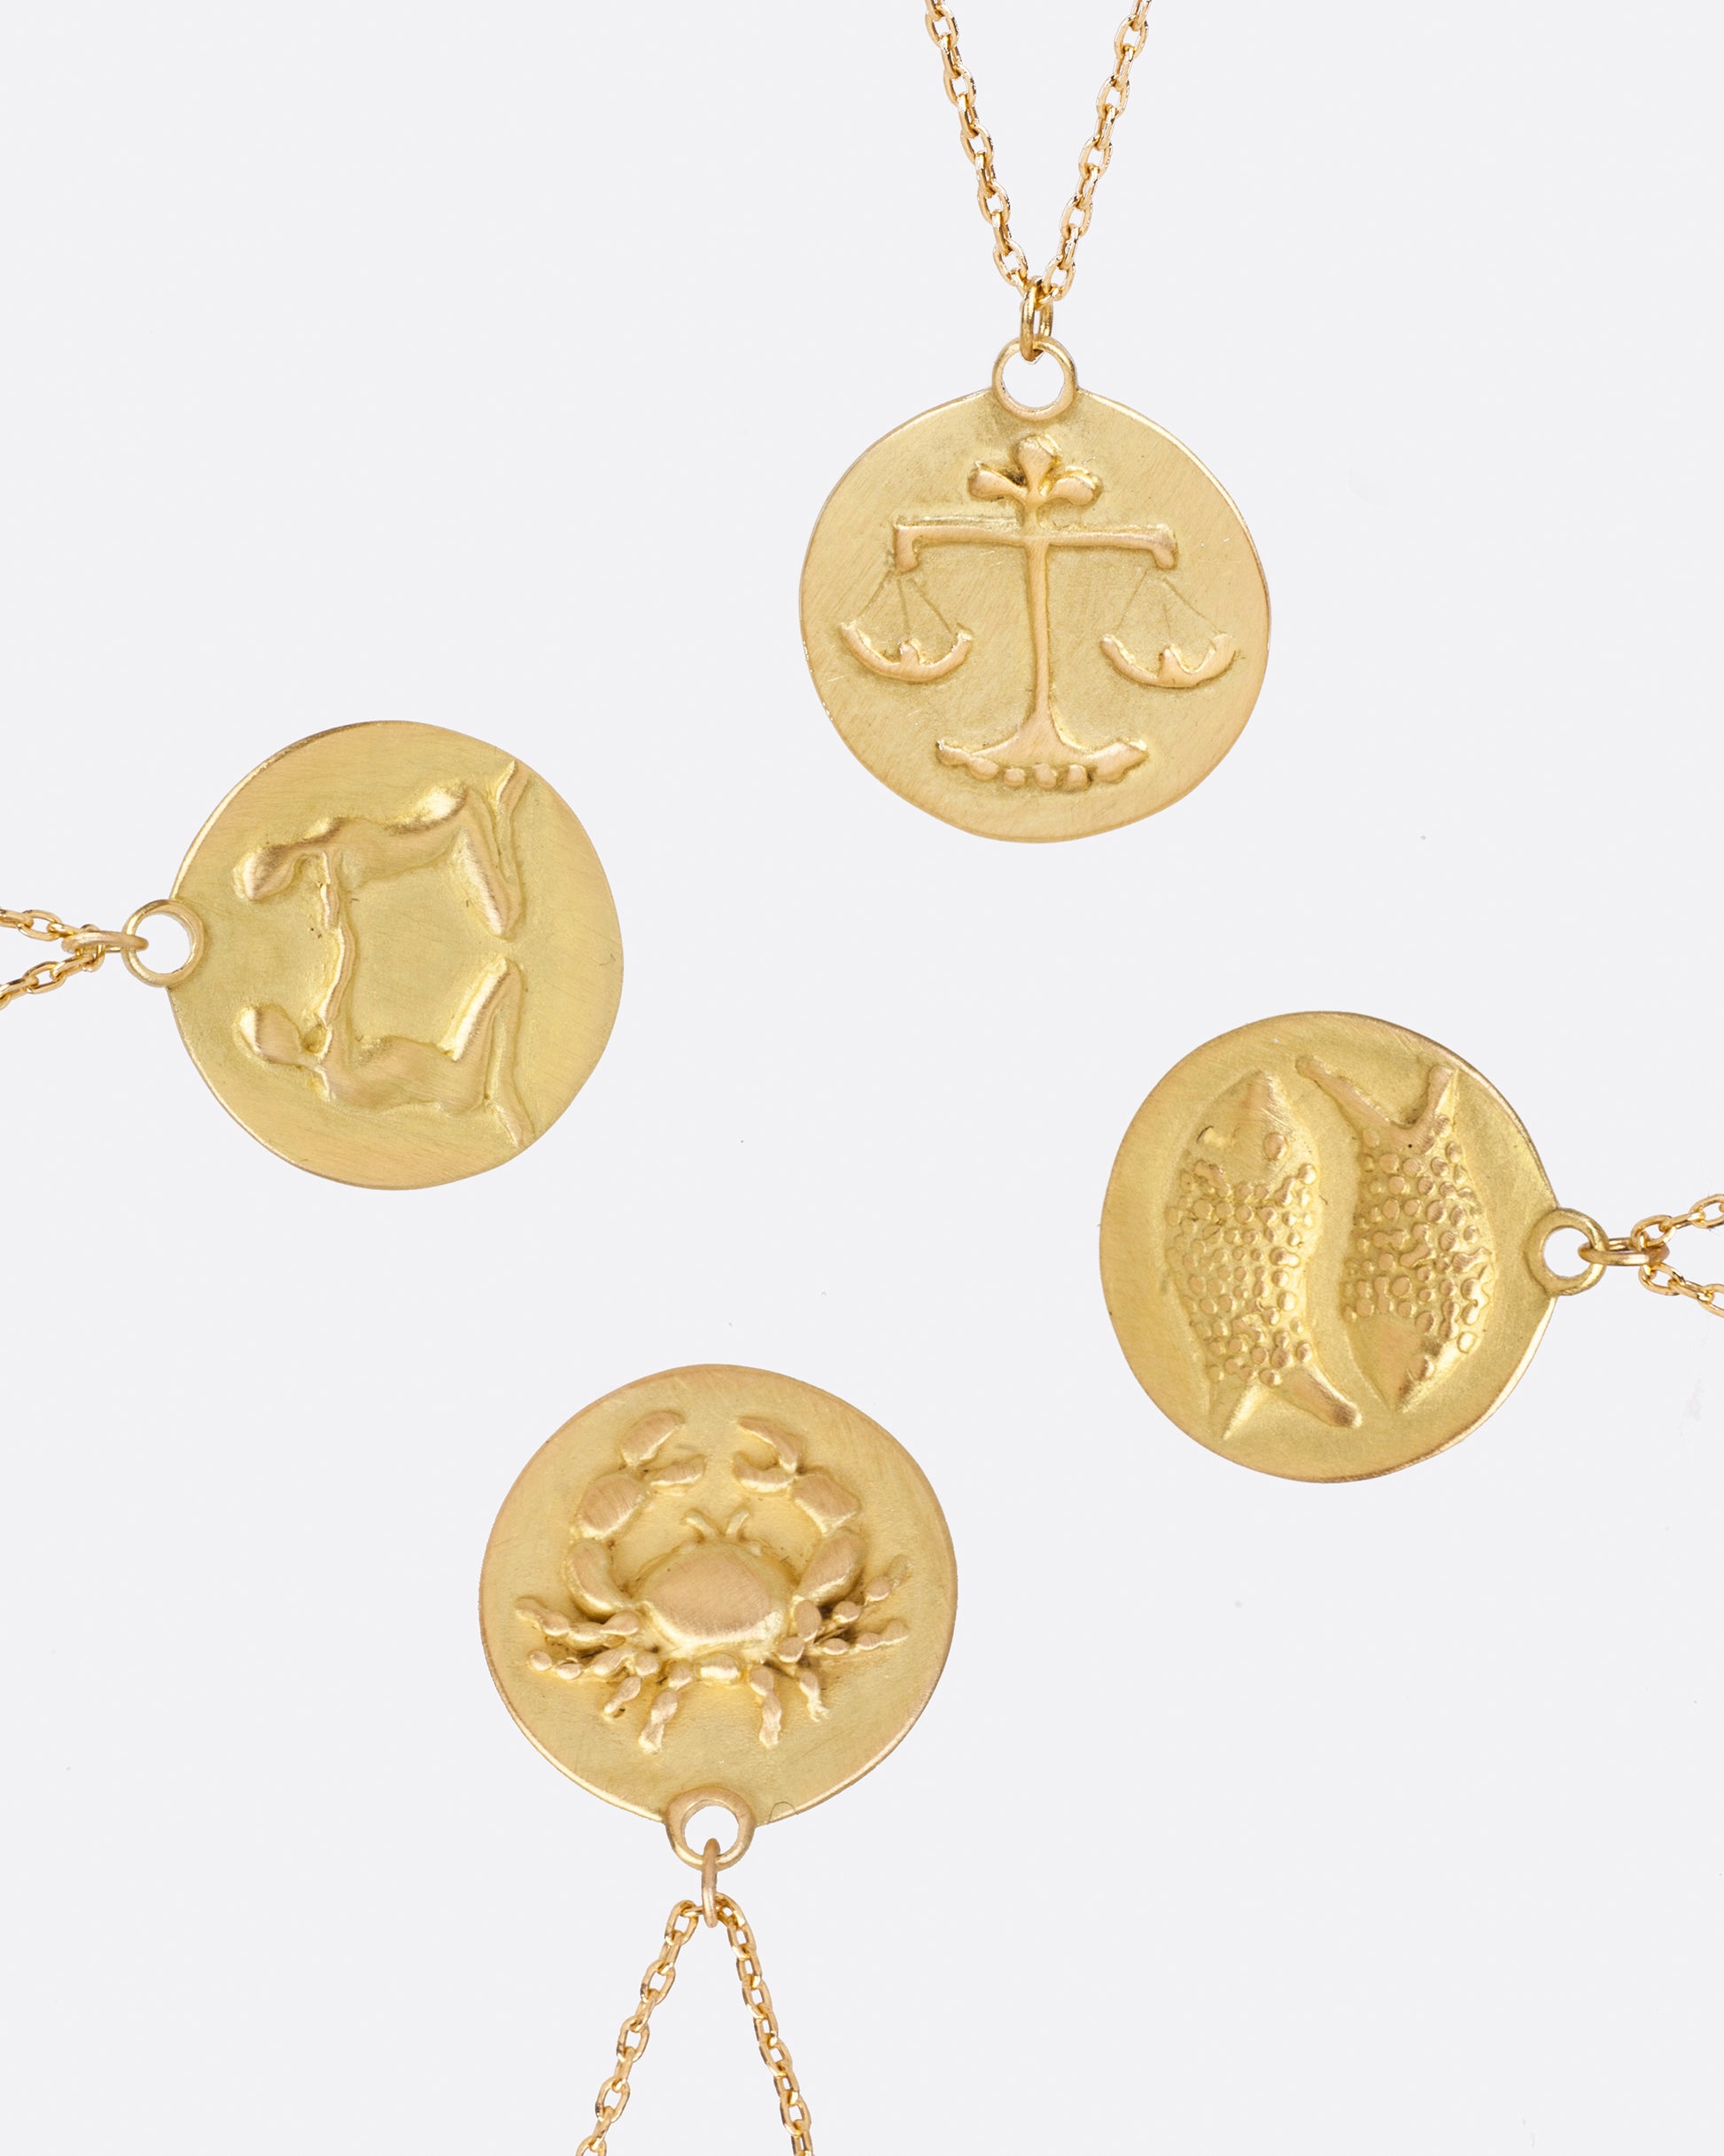 Each of these disc pendants features a hand carved and cast astrological symbol. With an ancient style design, these medallions are timeless and classic